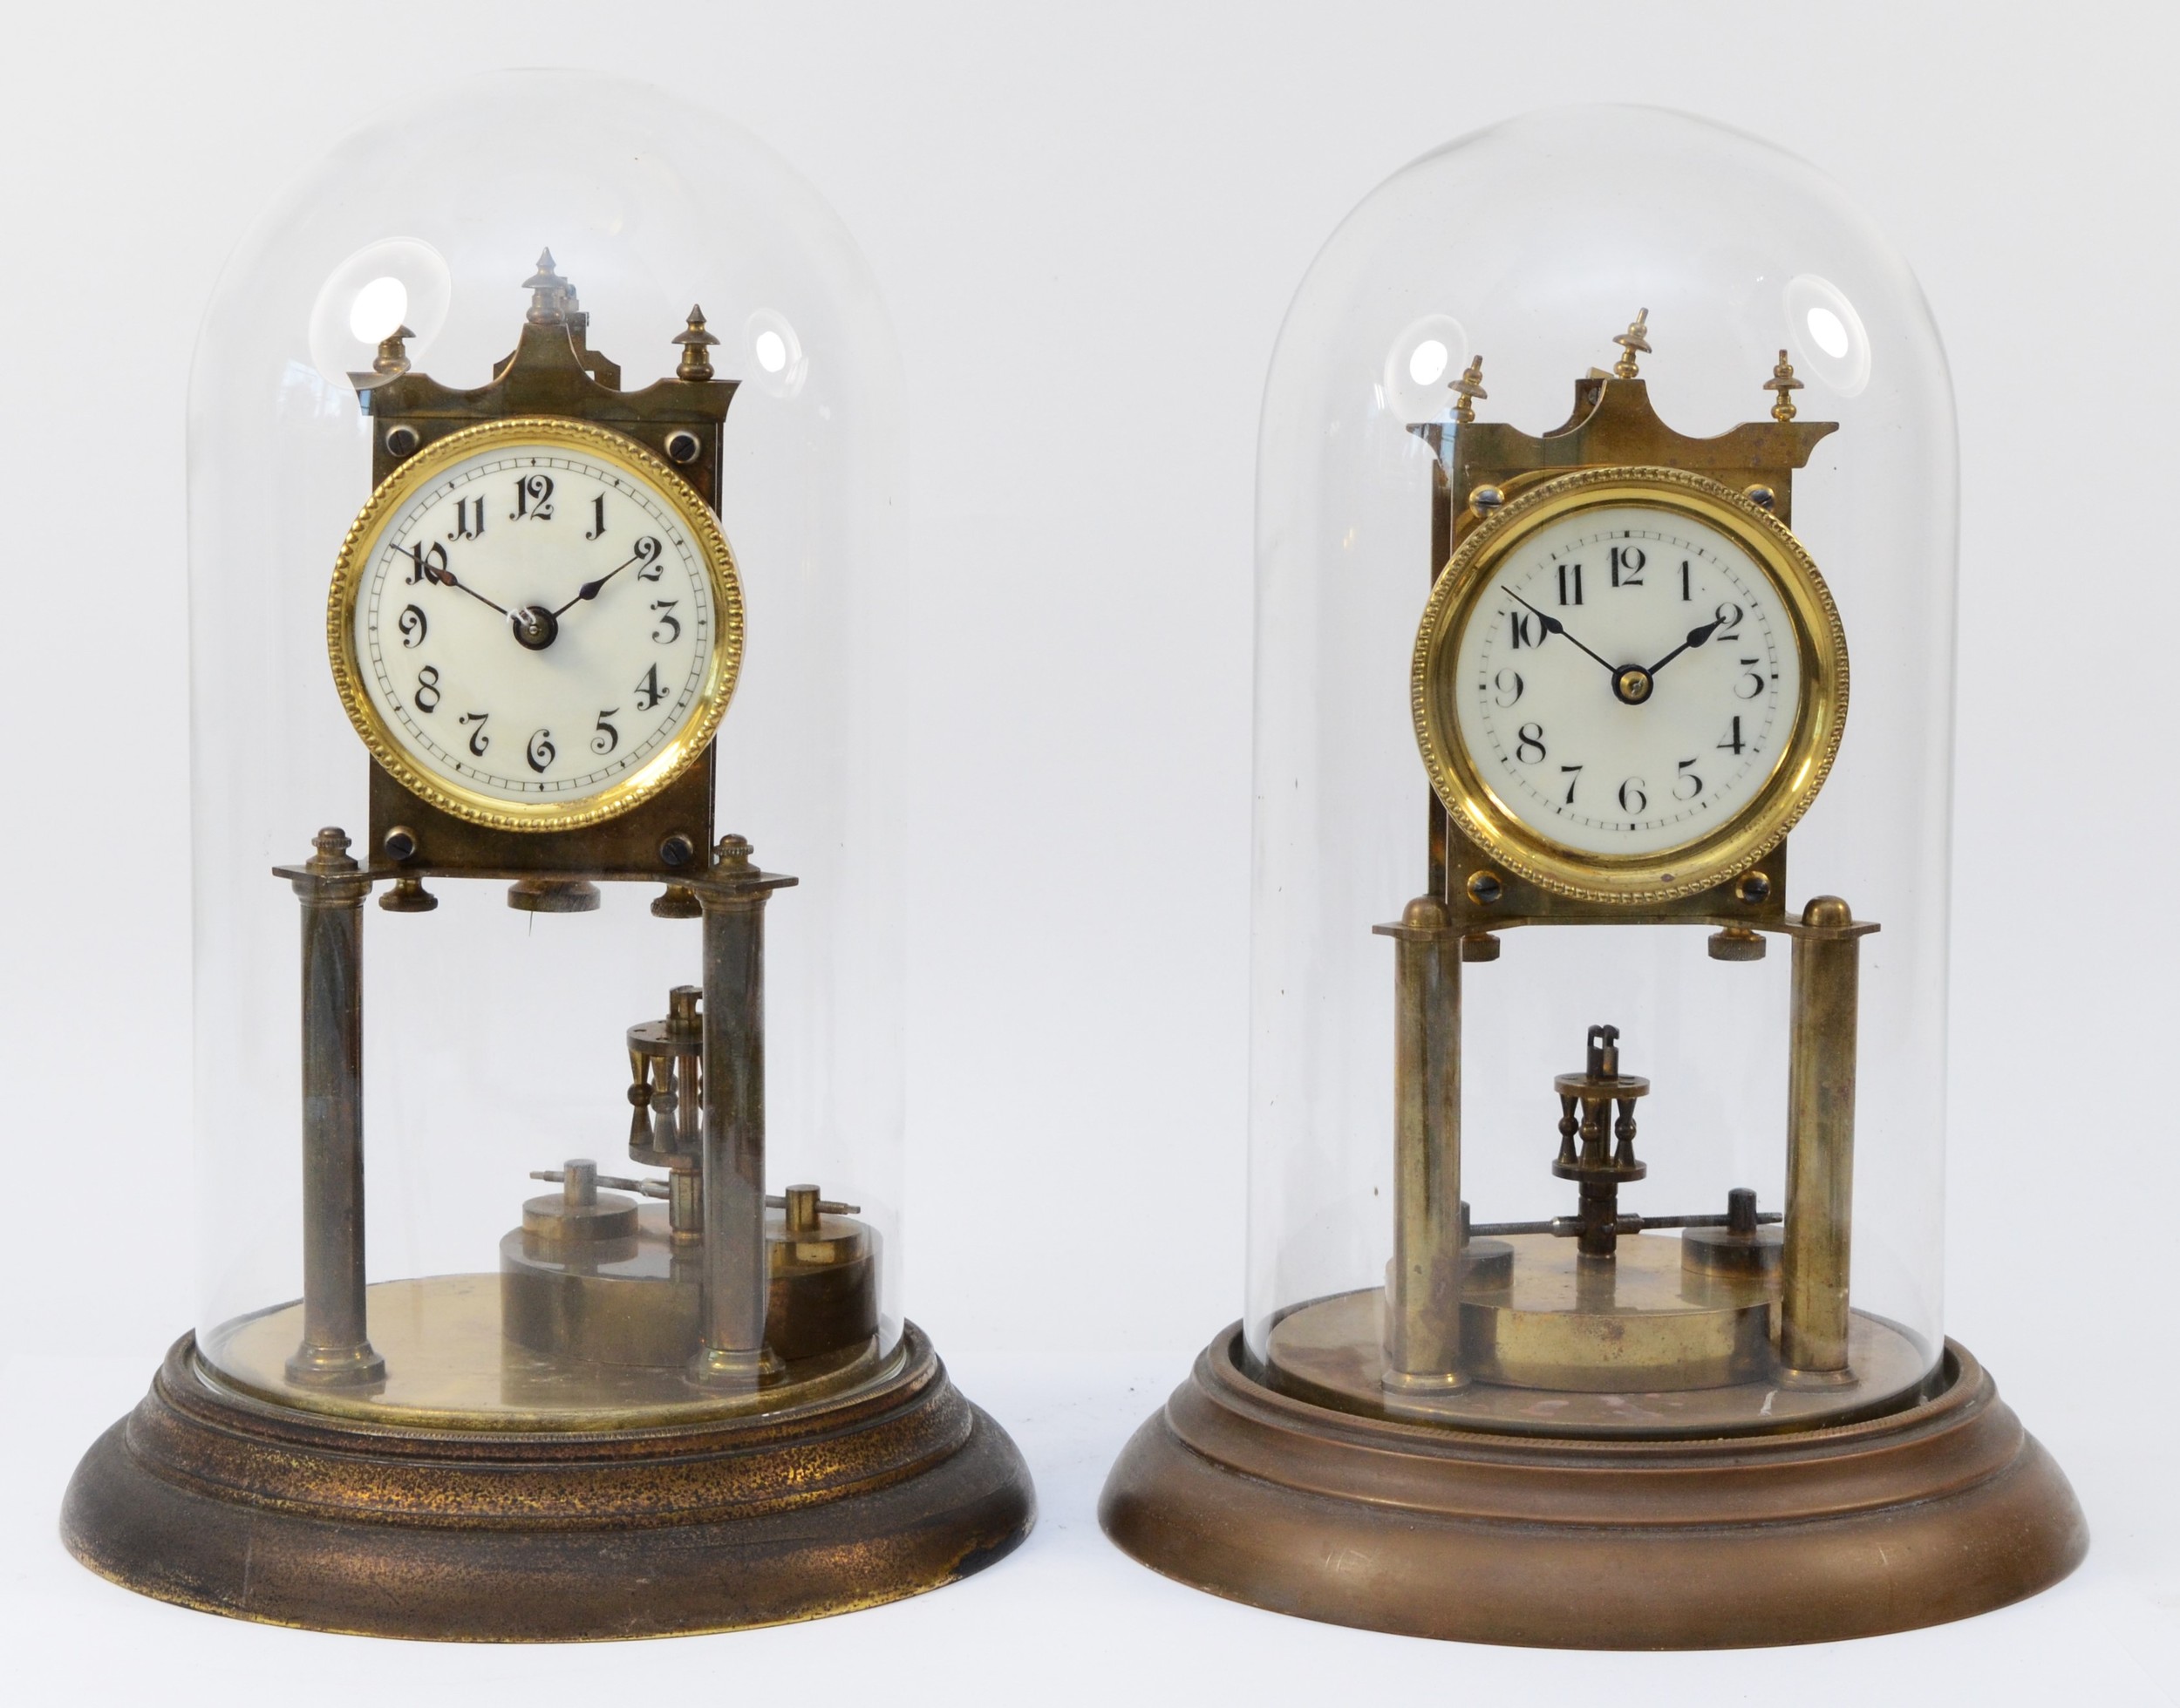 Two anniversary clocks, circa early 20th century, having single train movements fronted by porcelain